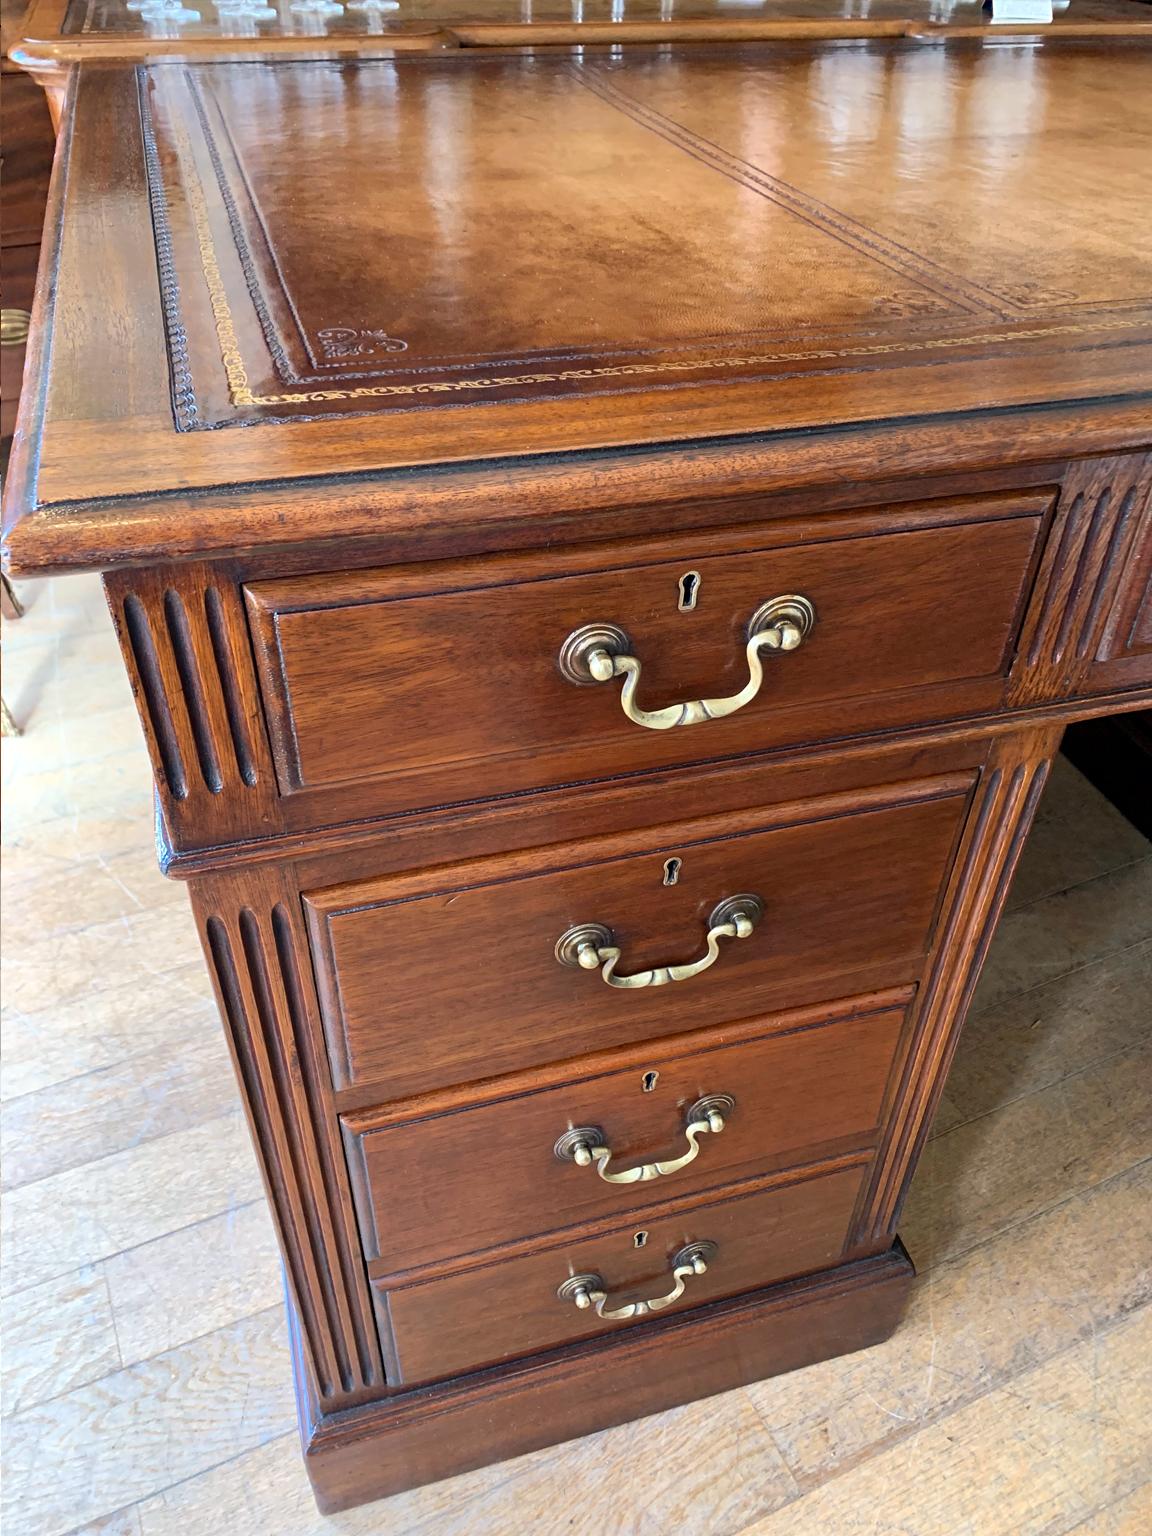 Early 20th Century Late Edwardian / 1920’s Panelled Pedestal Desk